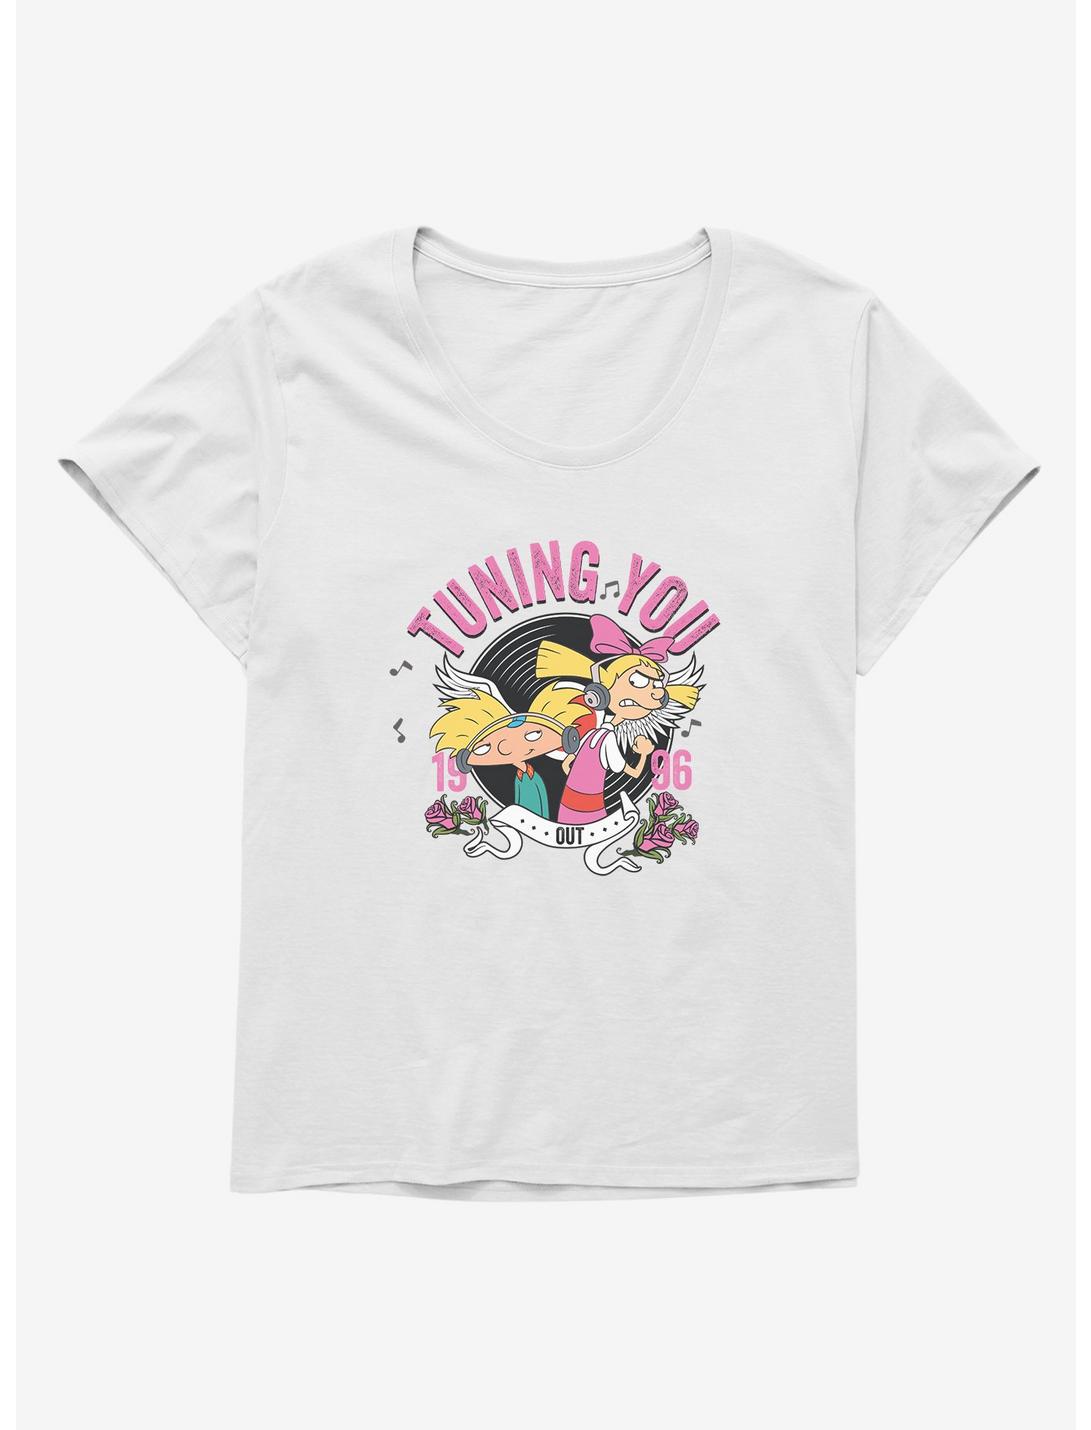 Hey Arnold! Tuning You Out 1996 Girls T-Shirt Plus Size, , hi-res